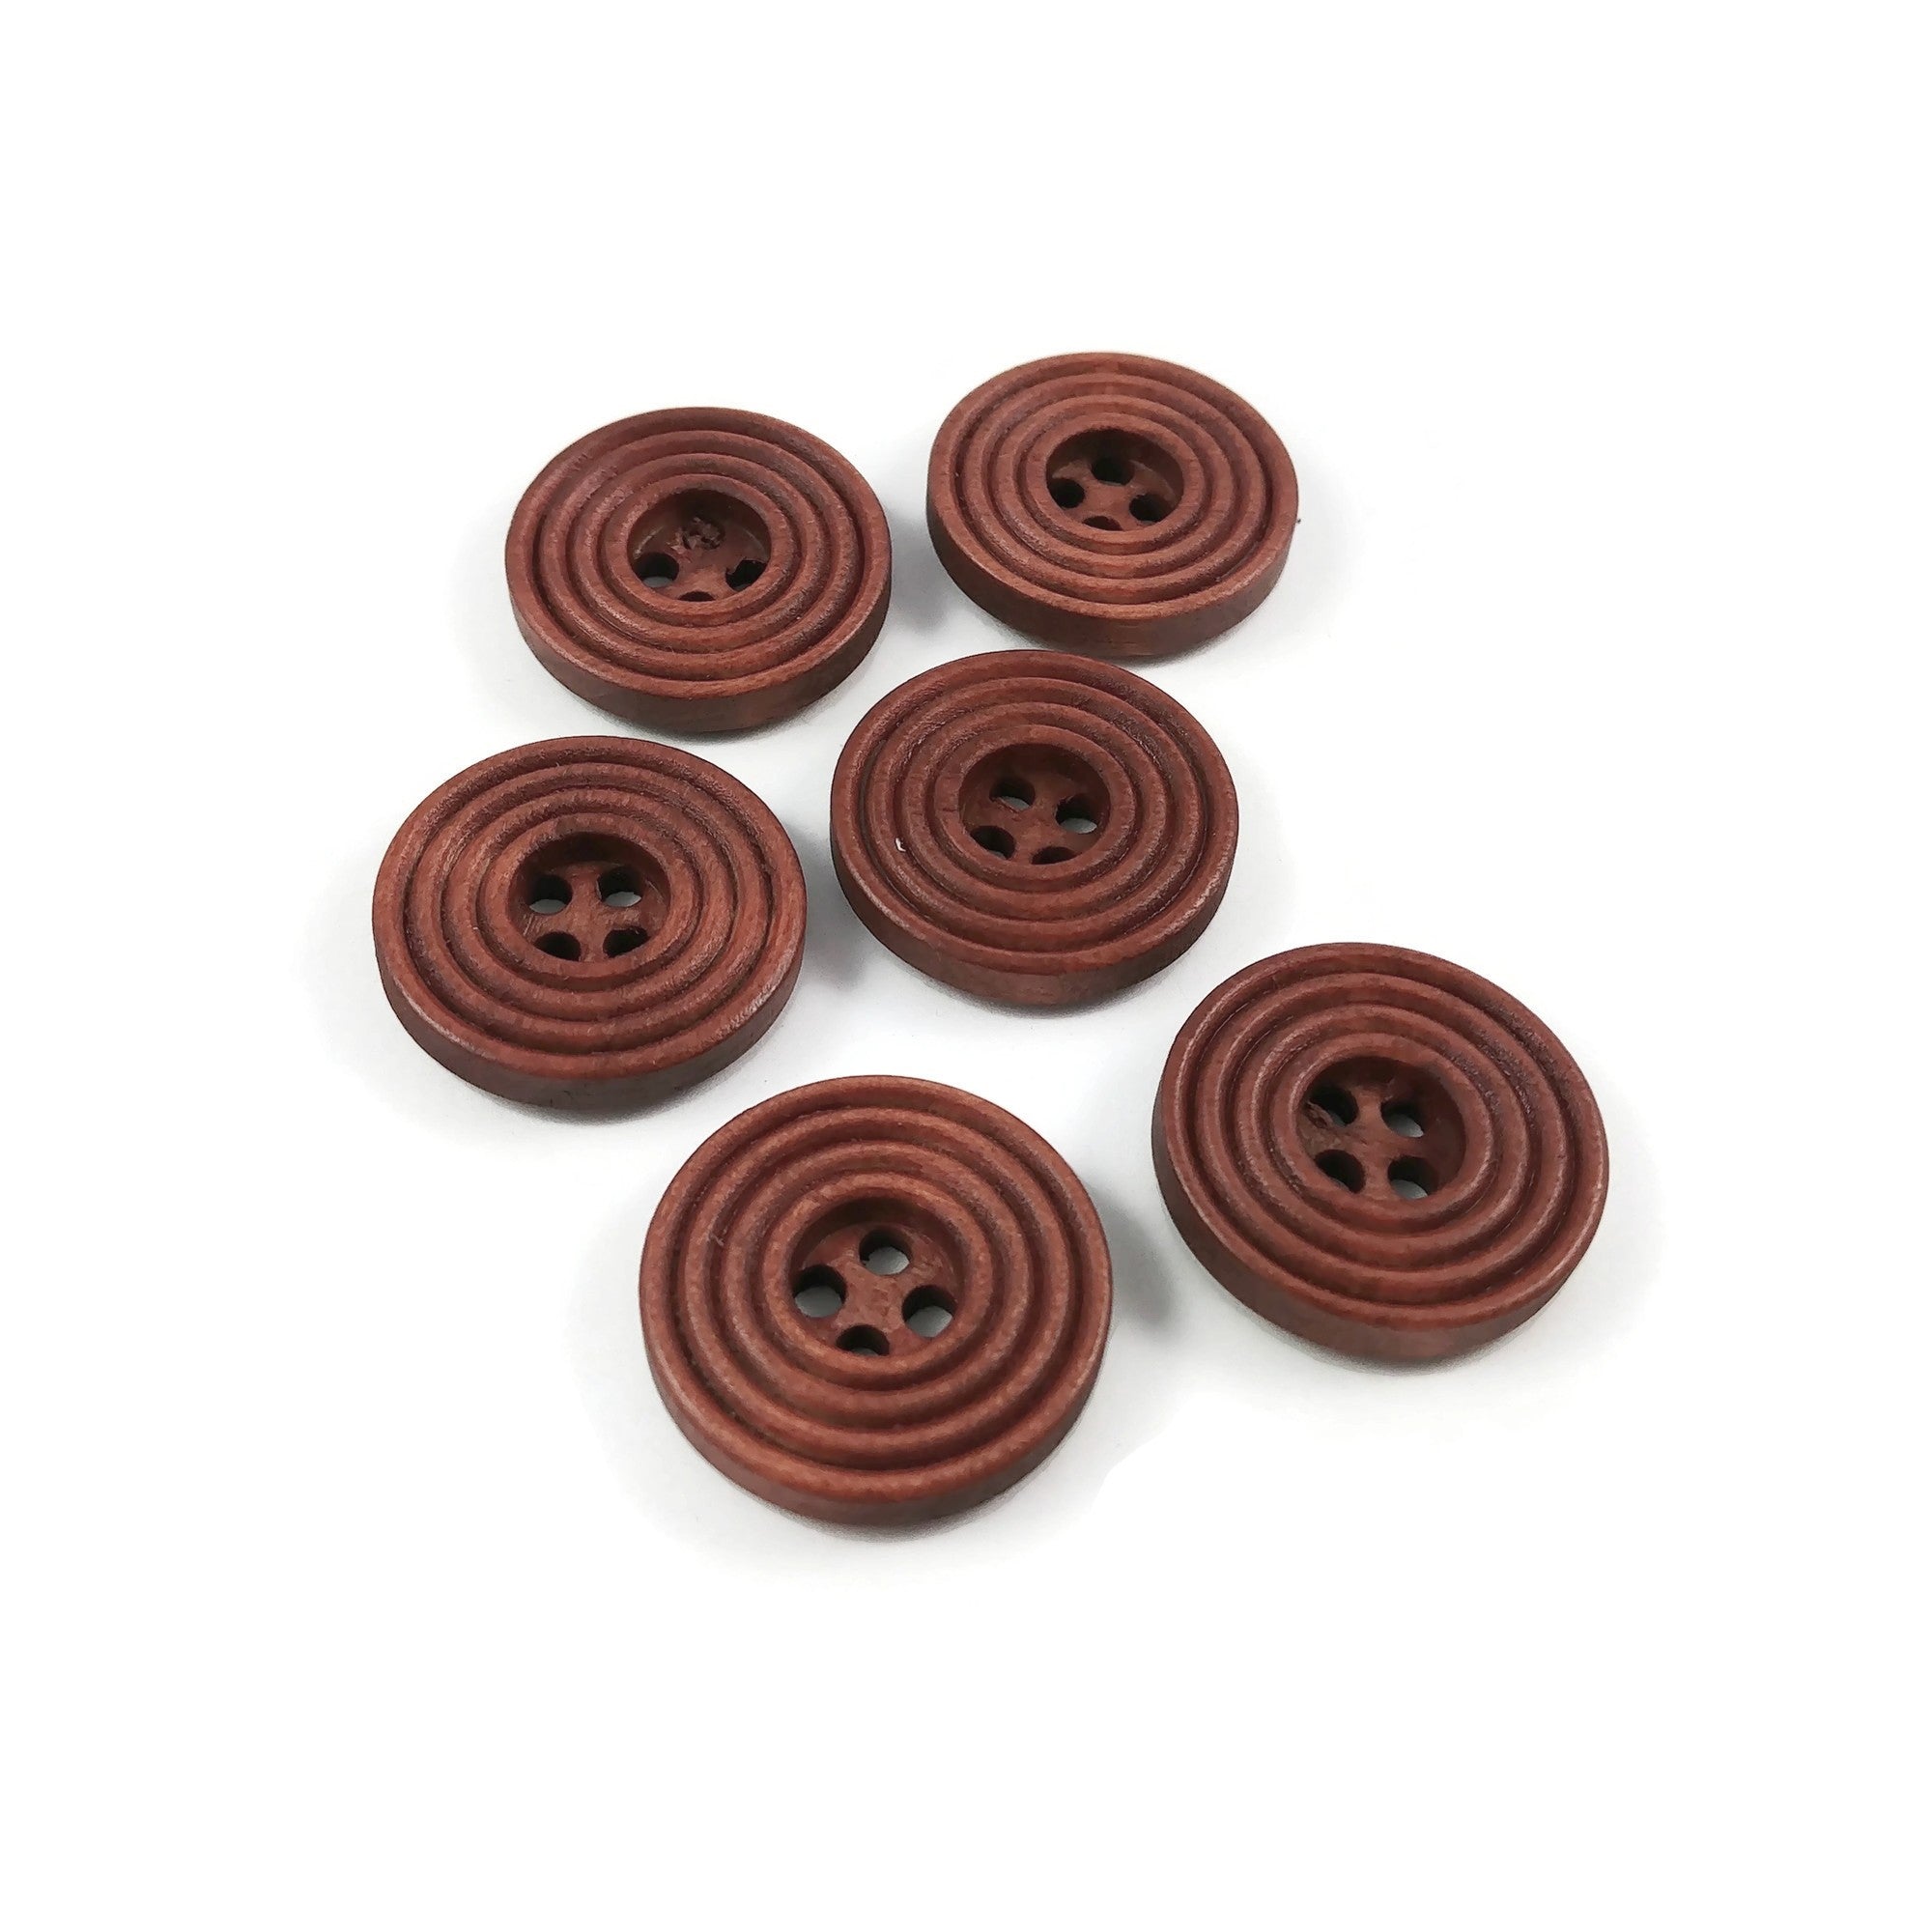 Buy 20mm Round Wooden Buttons Online. COD. Low Prices. Free Shipping.  Premium Quality.